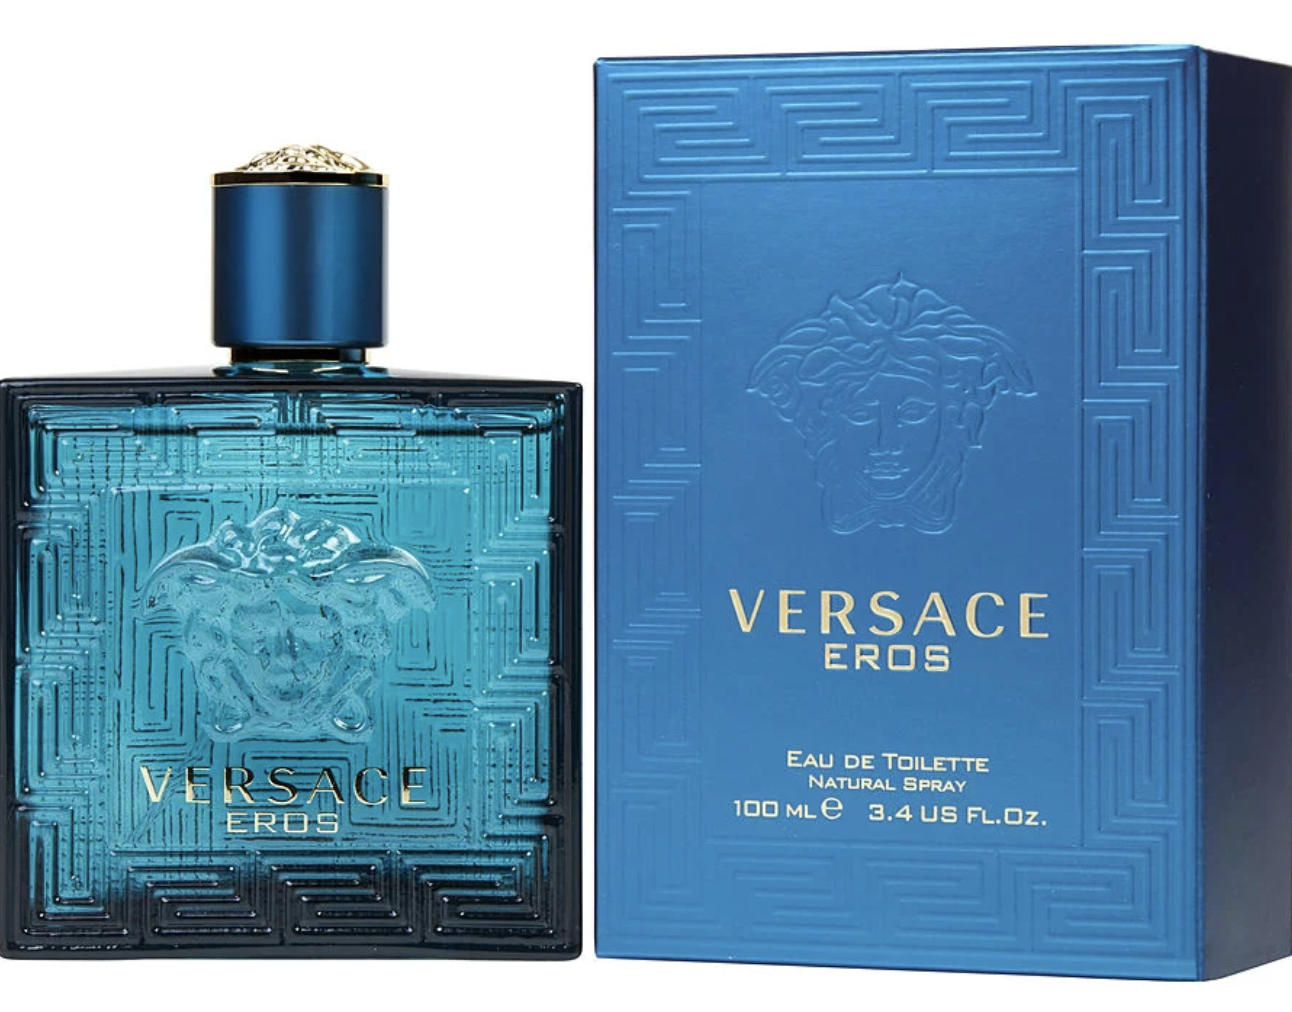 Save on Versace fragrances with FragranceNet offers! 